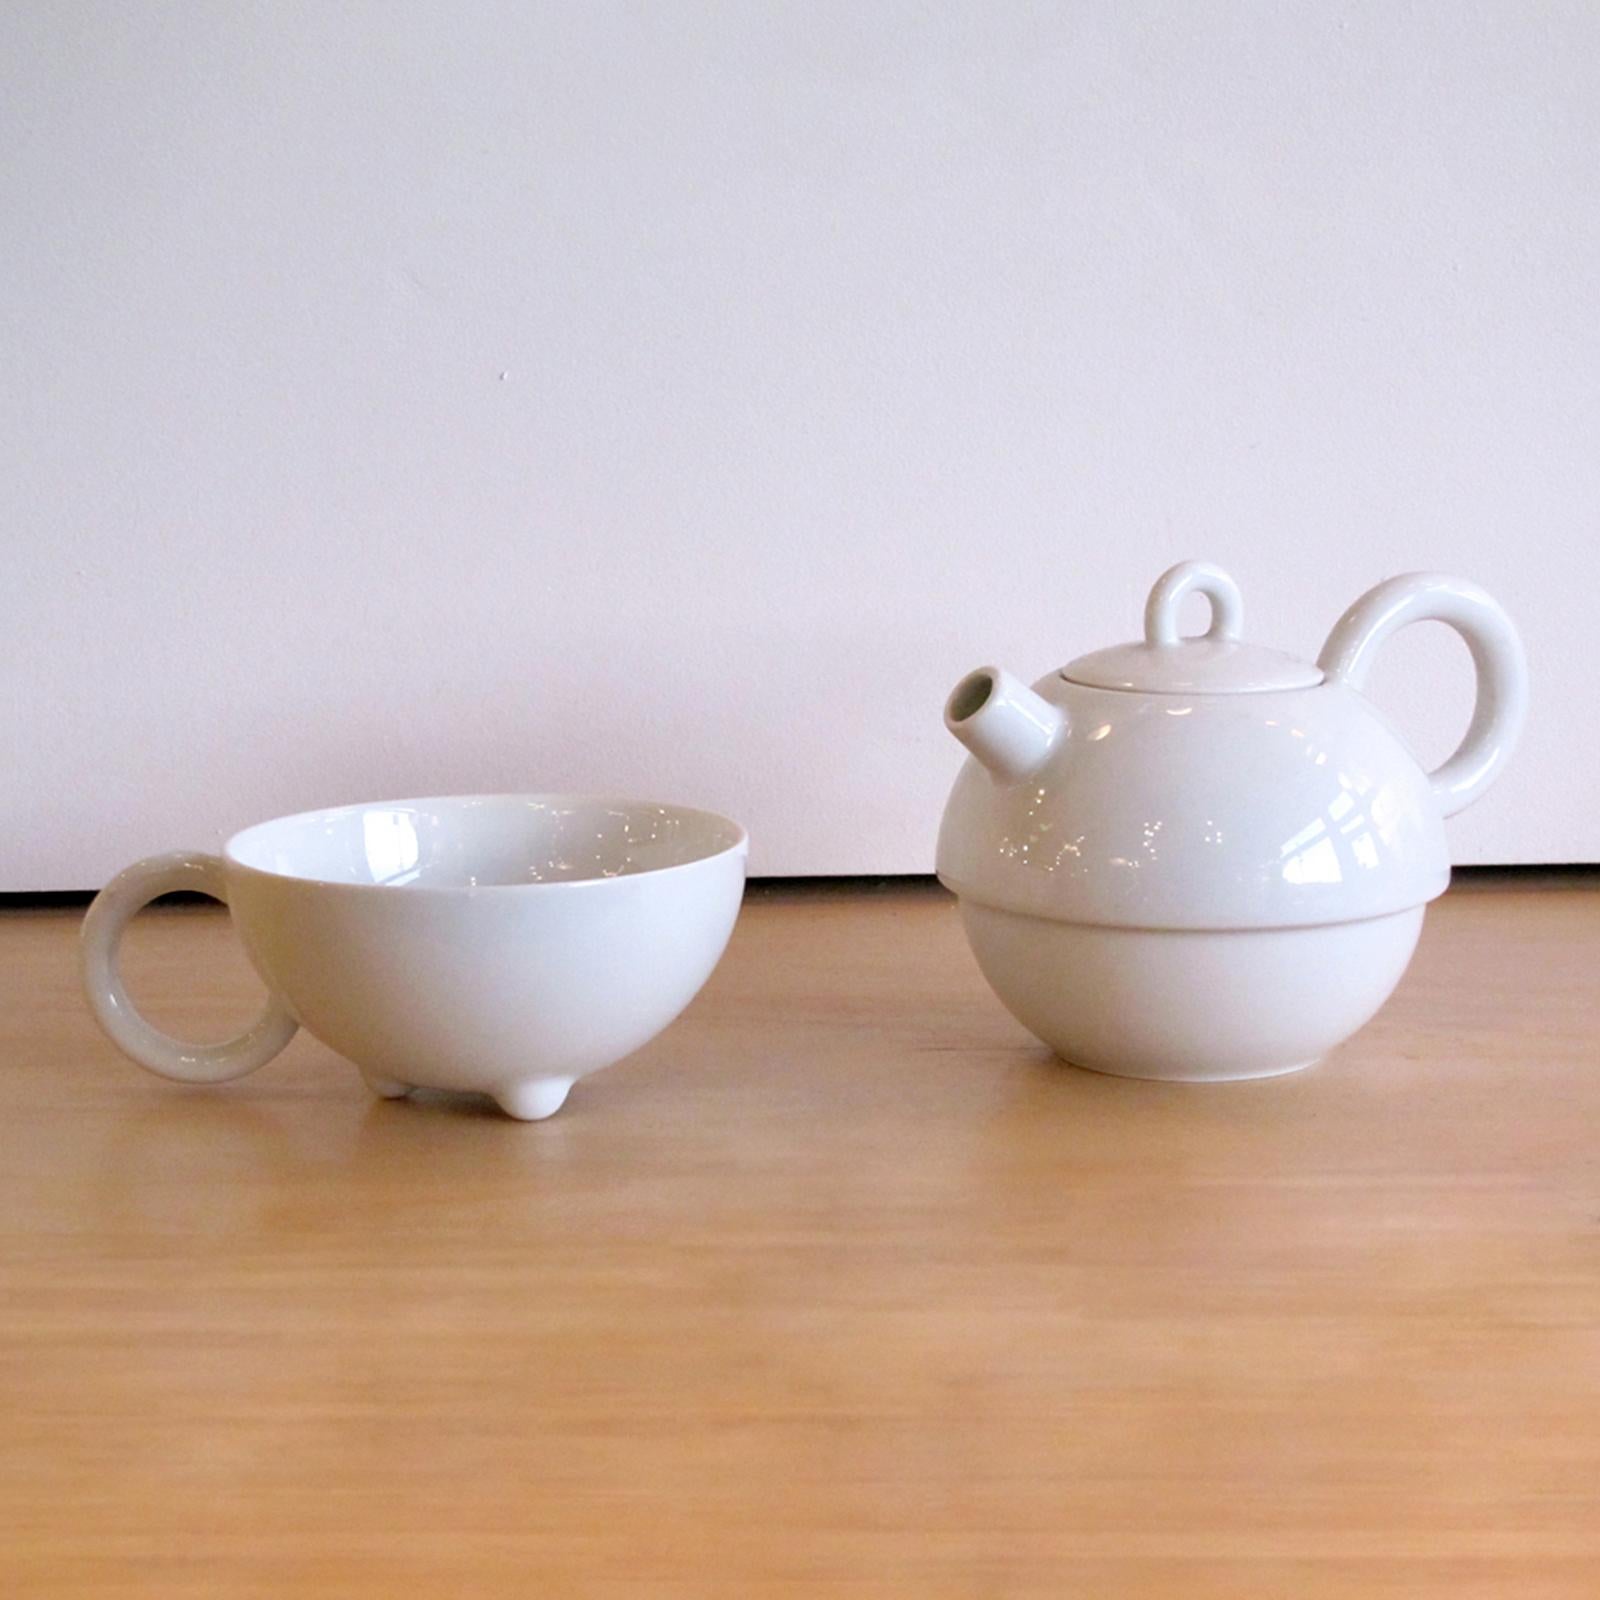 Late 20th Century Matteo Thun for Arzberg Tea-for-One Set, 1980 For Sale